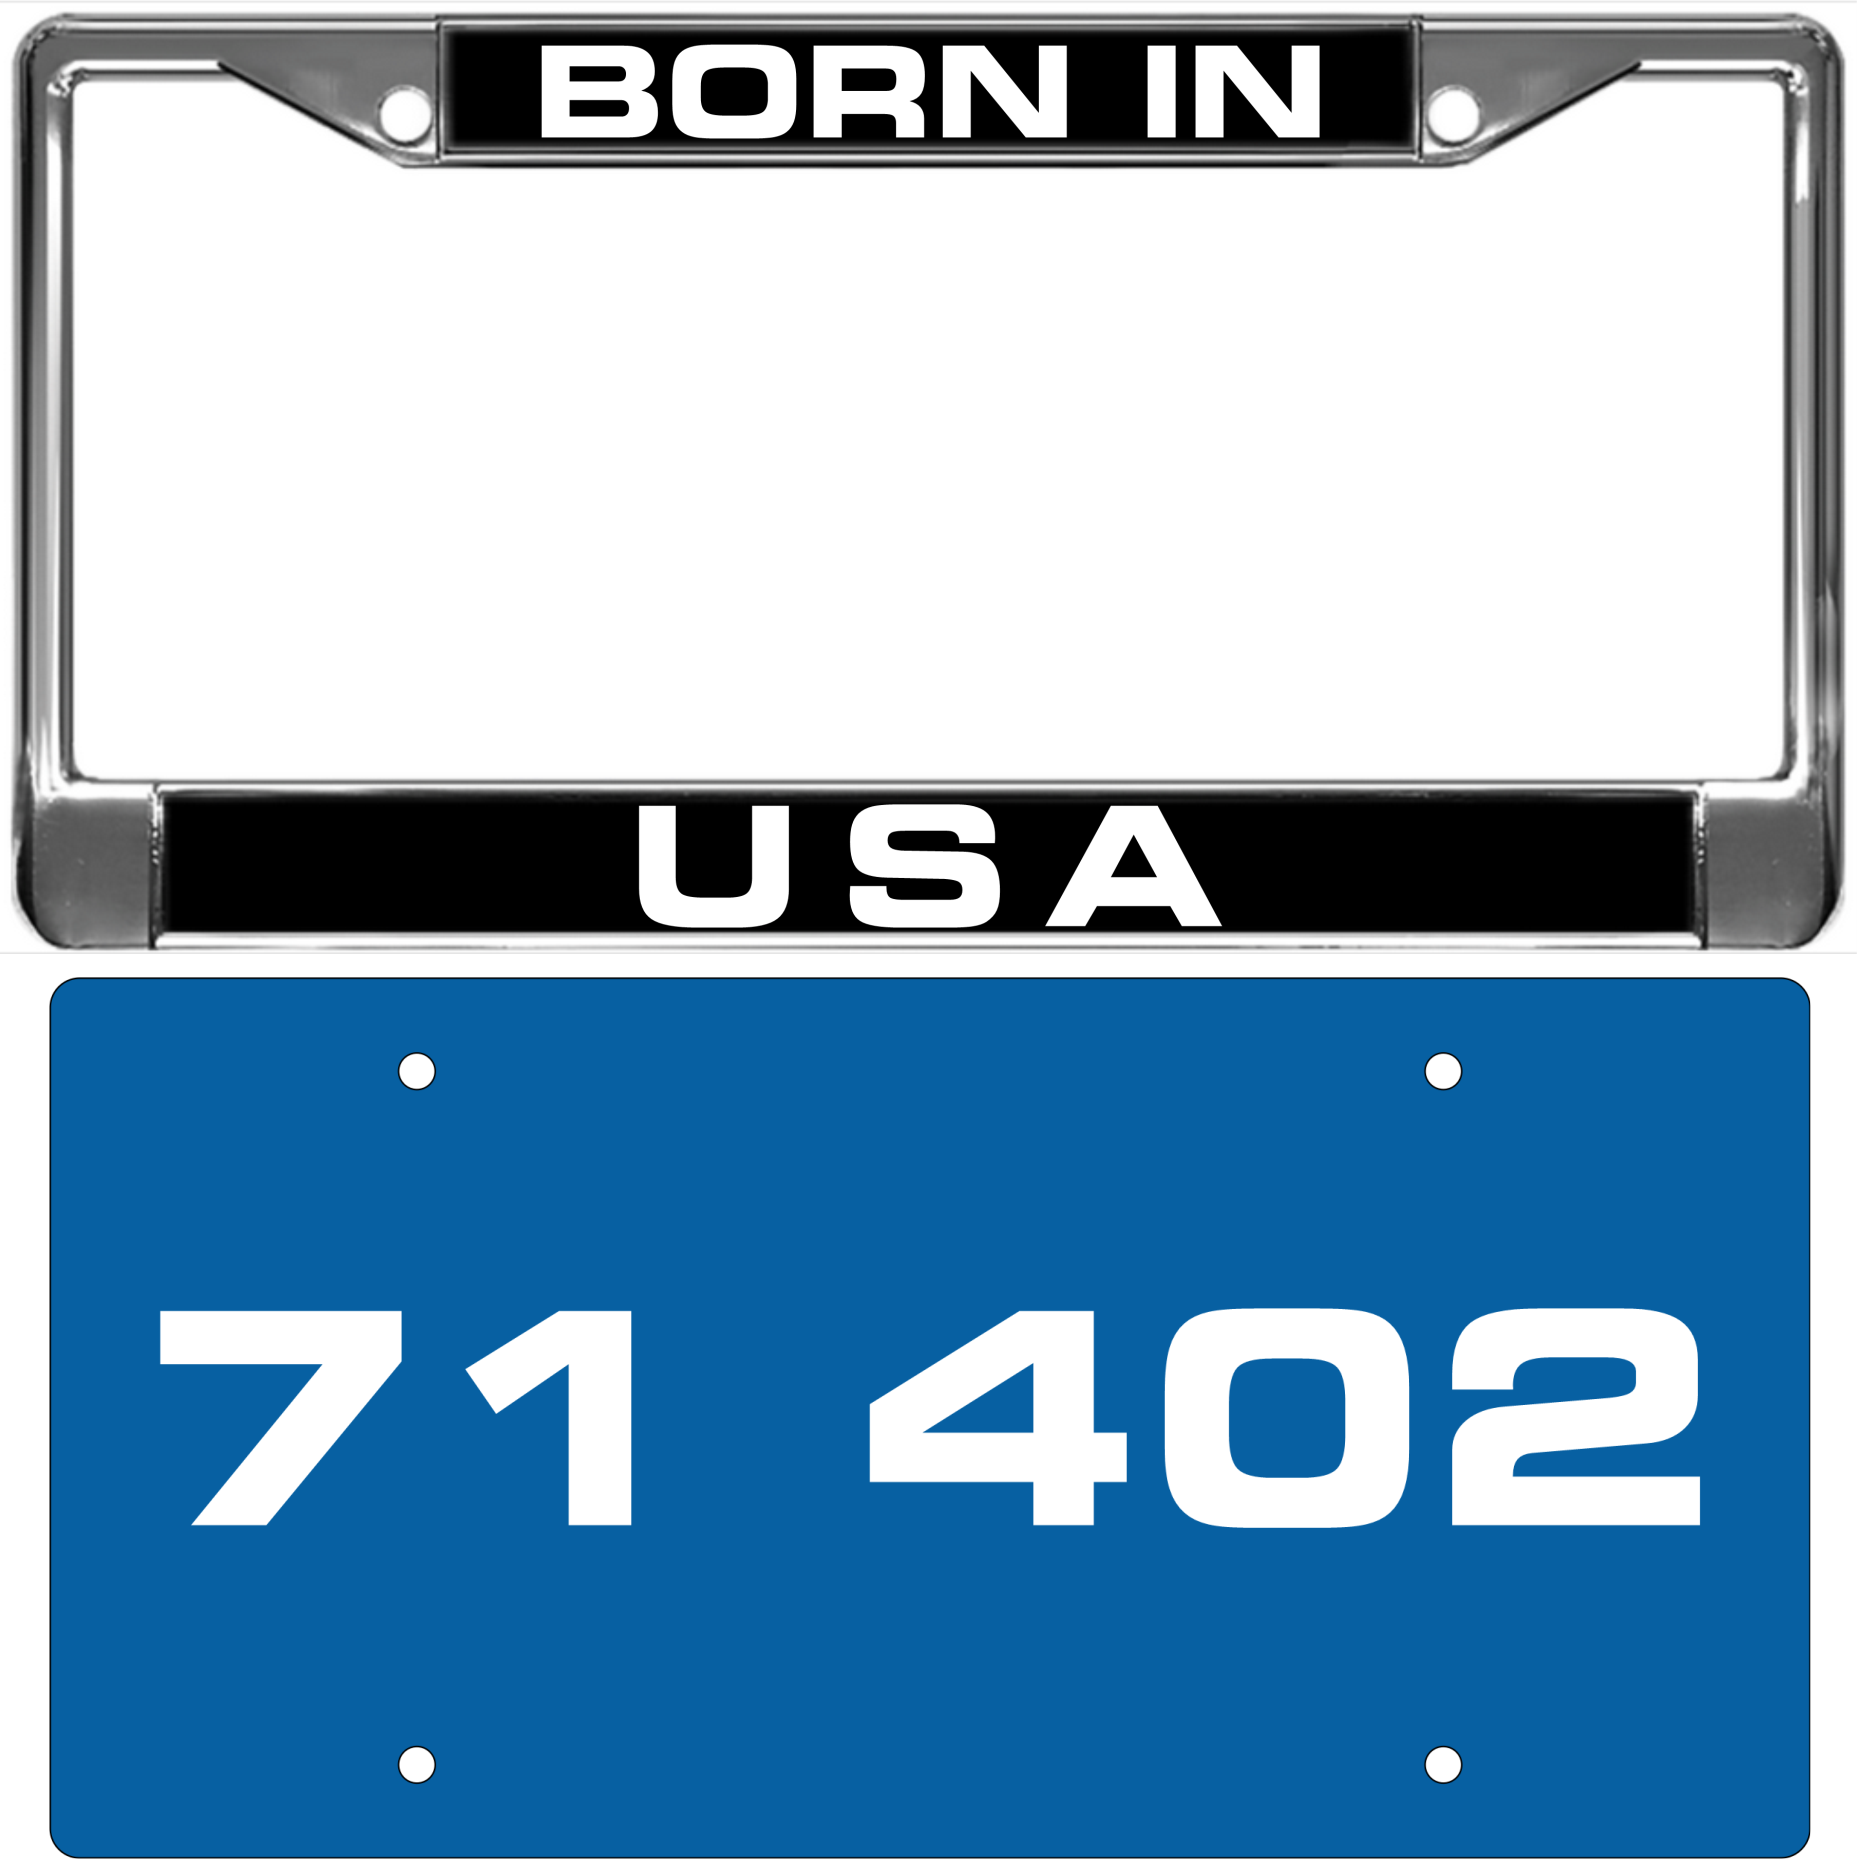 71 402 - Custom metal license plate frame with license plate